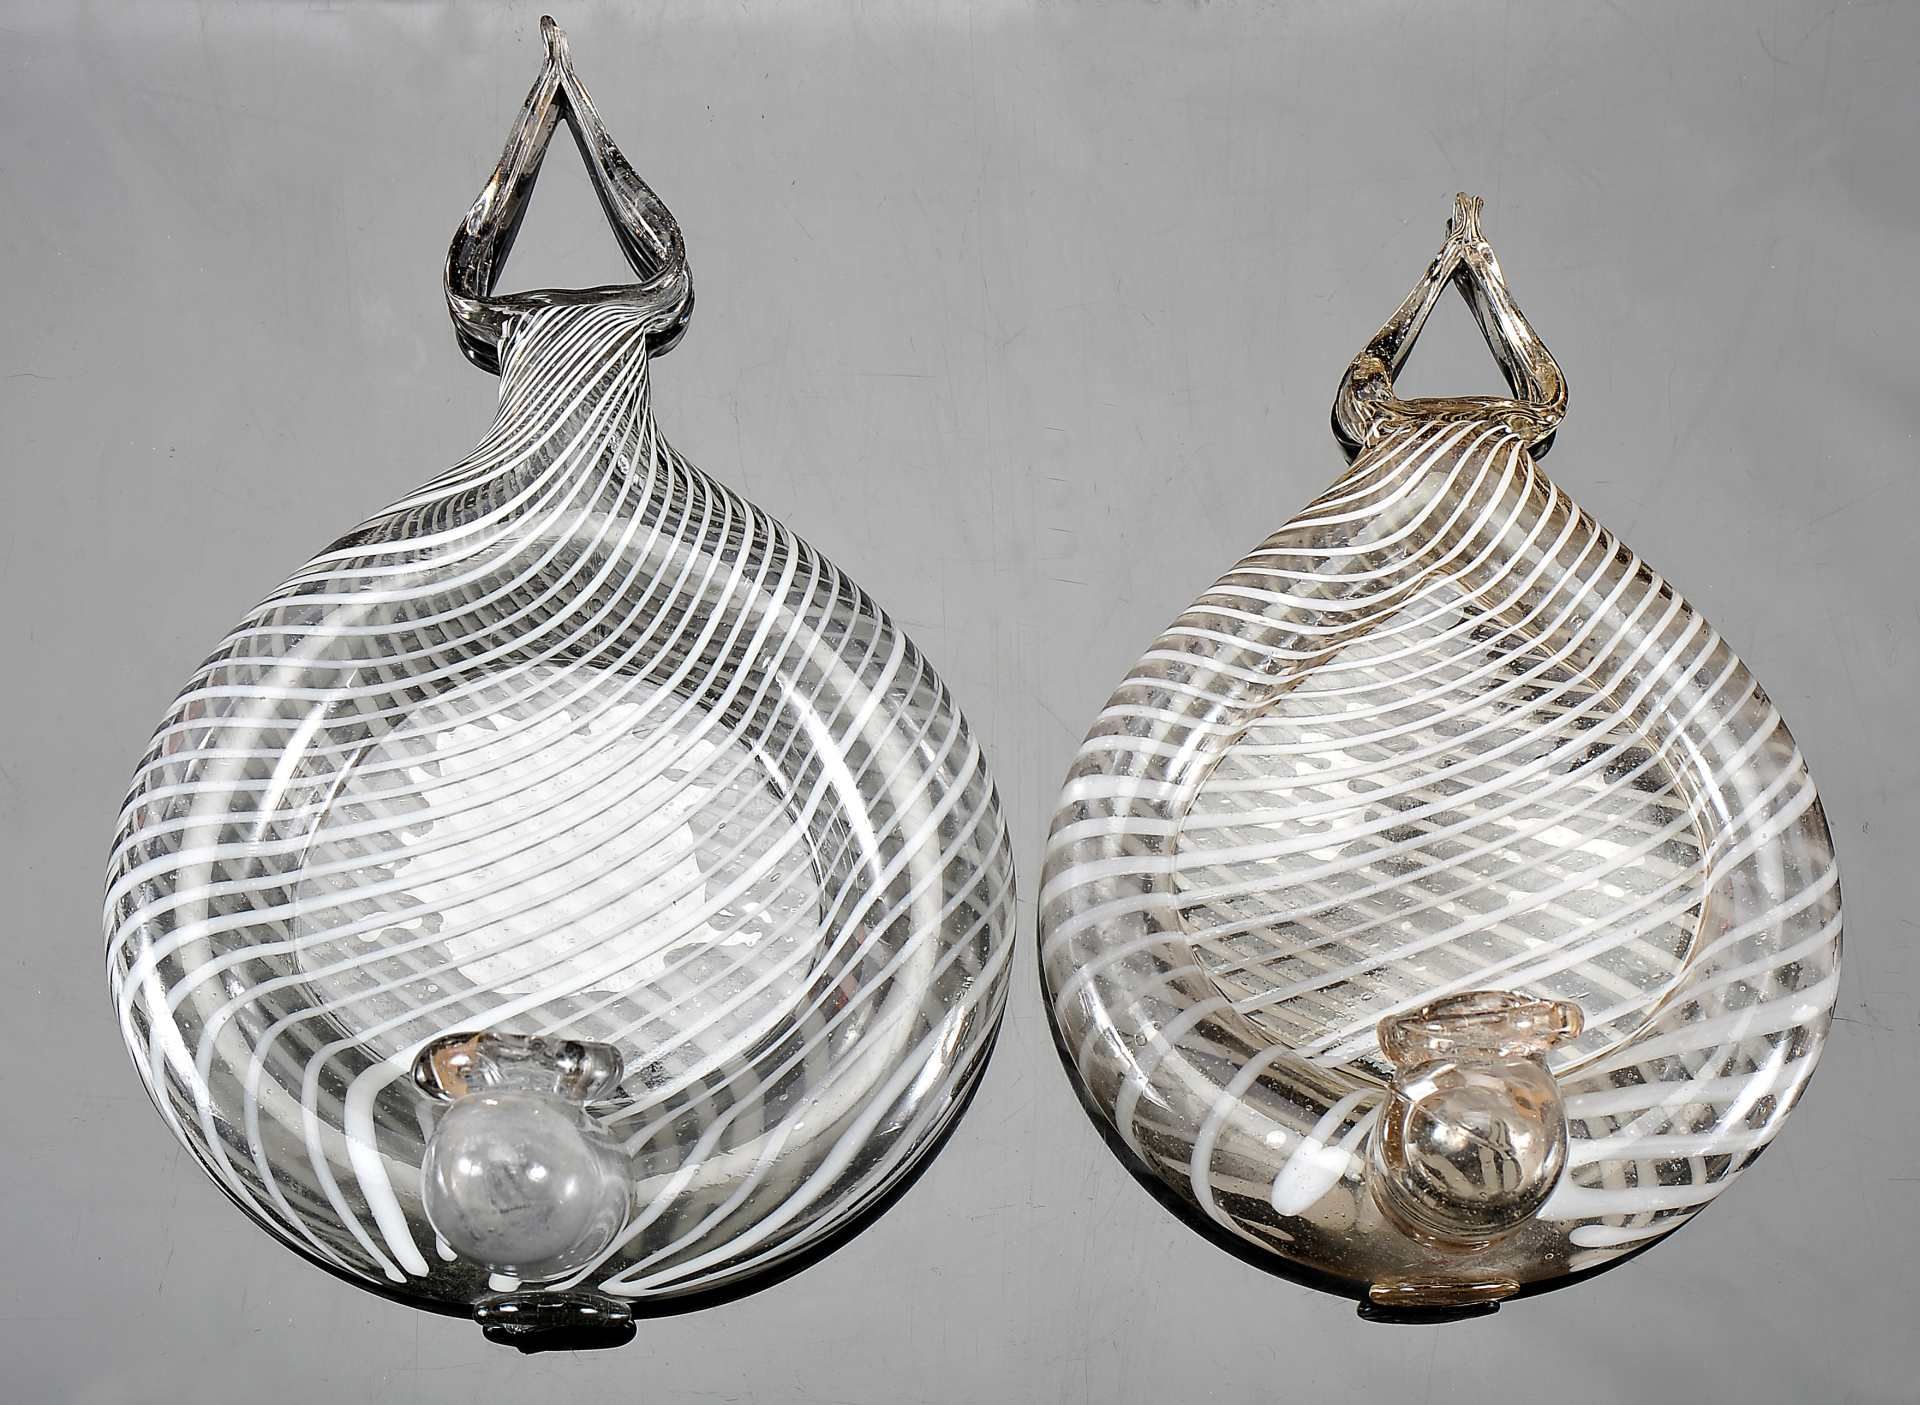 Two suspension lamps